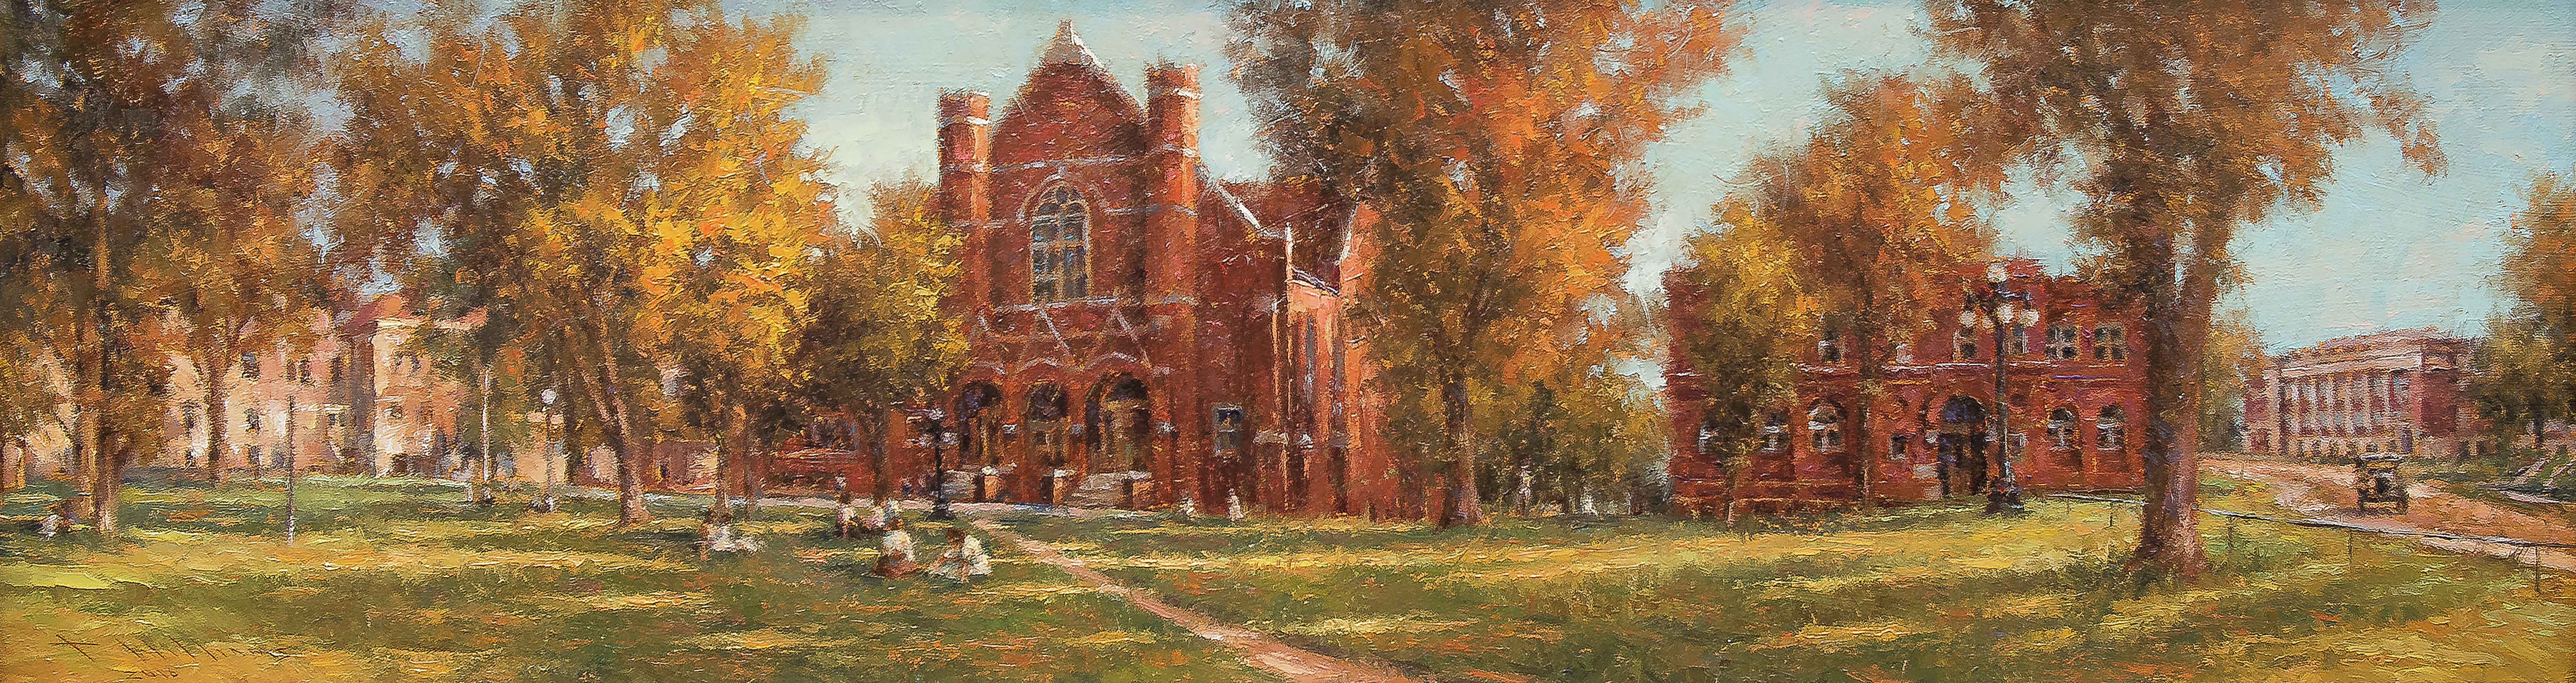 This is a depiction of the college as it was seen in 1902 that was painted for our 2017 sesquicentennial celebration. This painting was commissioned by Todd Williams.